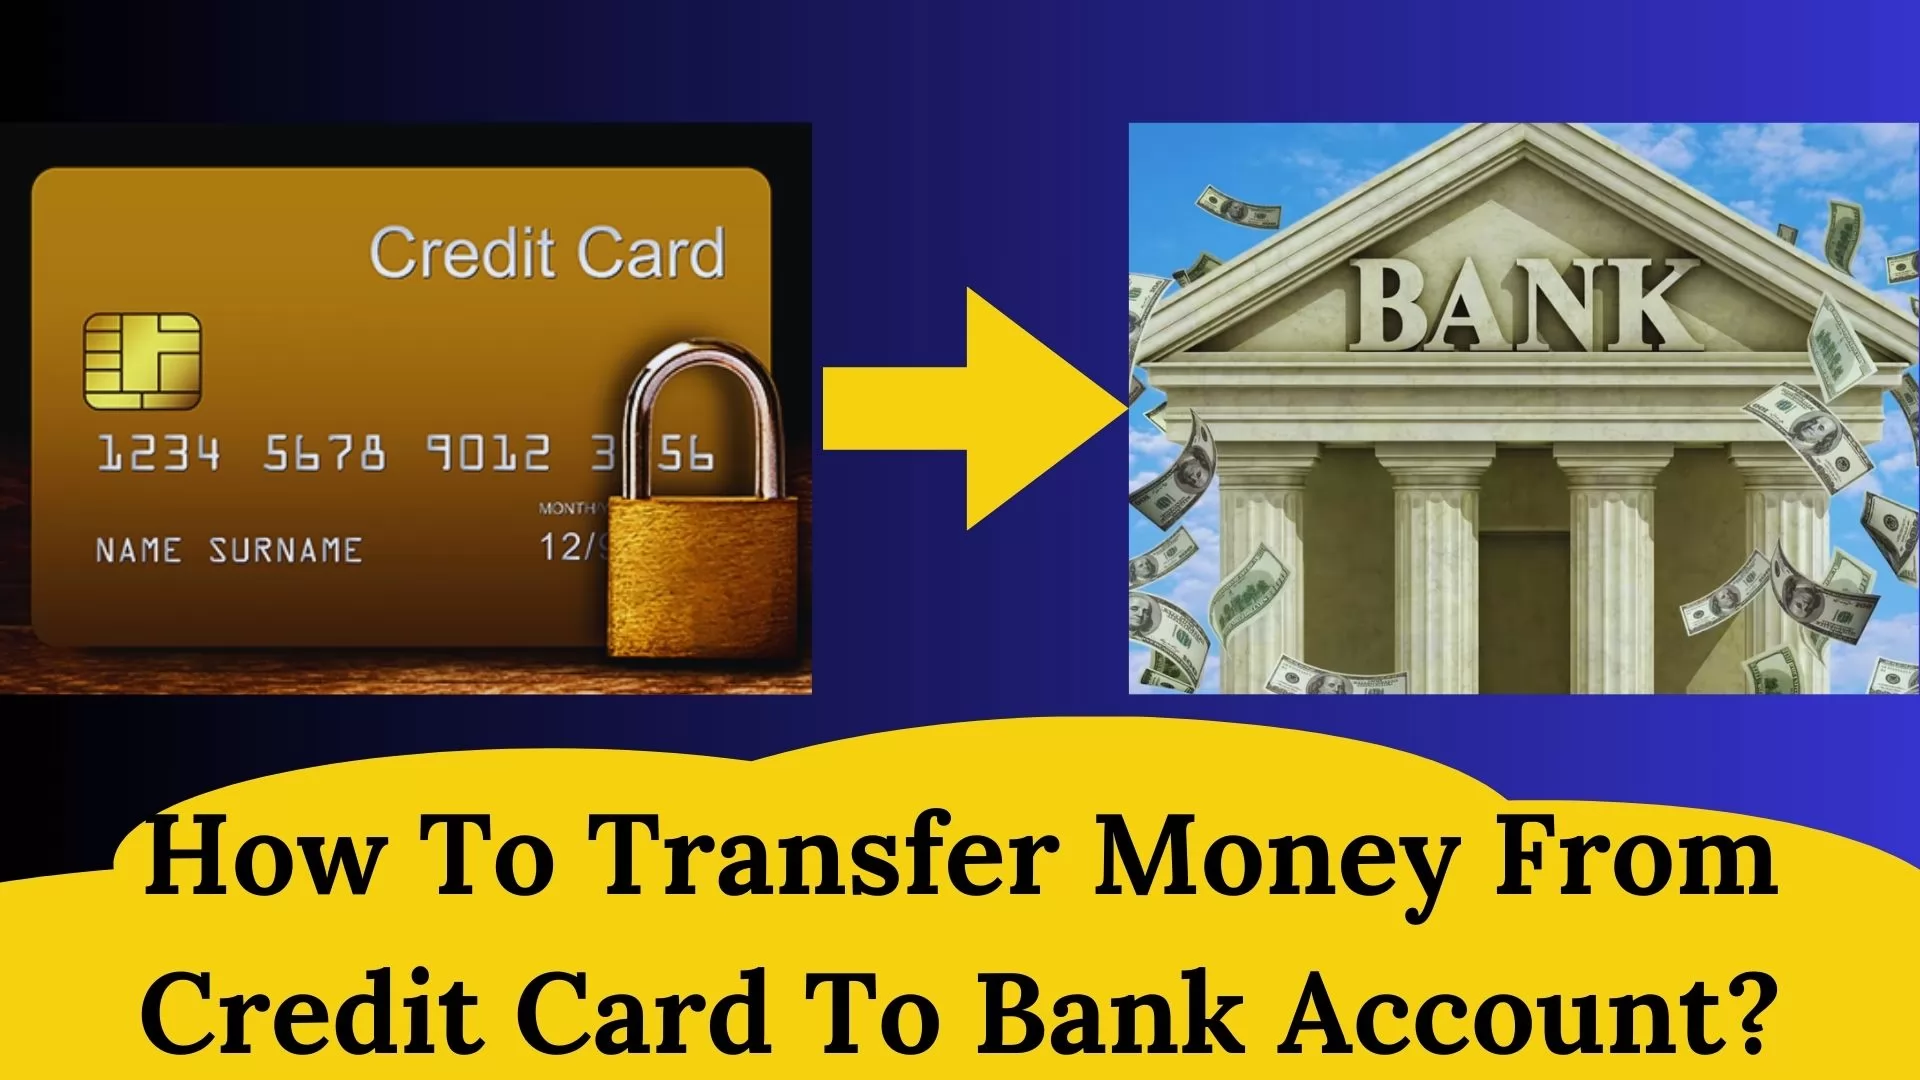 How To Transfer Money From Credit Card To Bank Account?